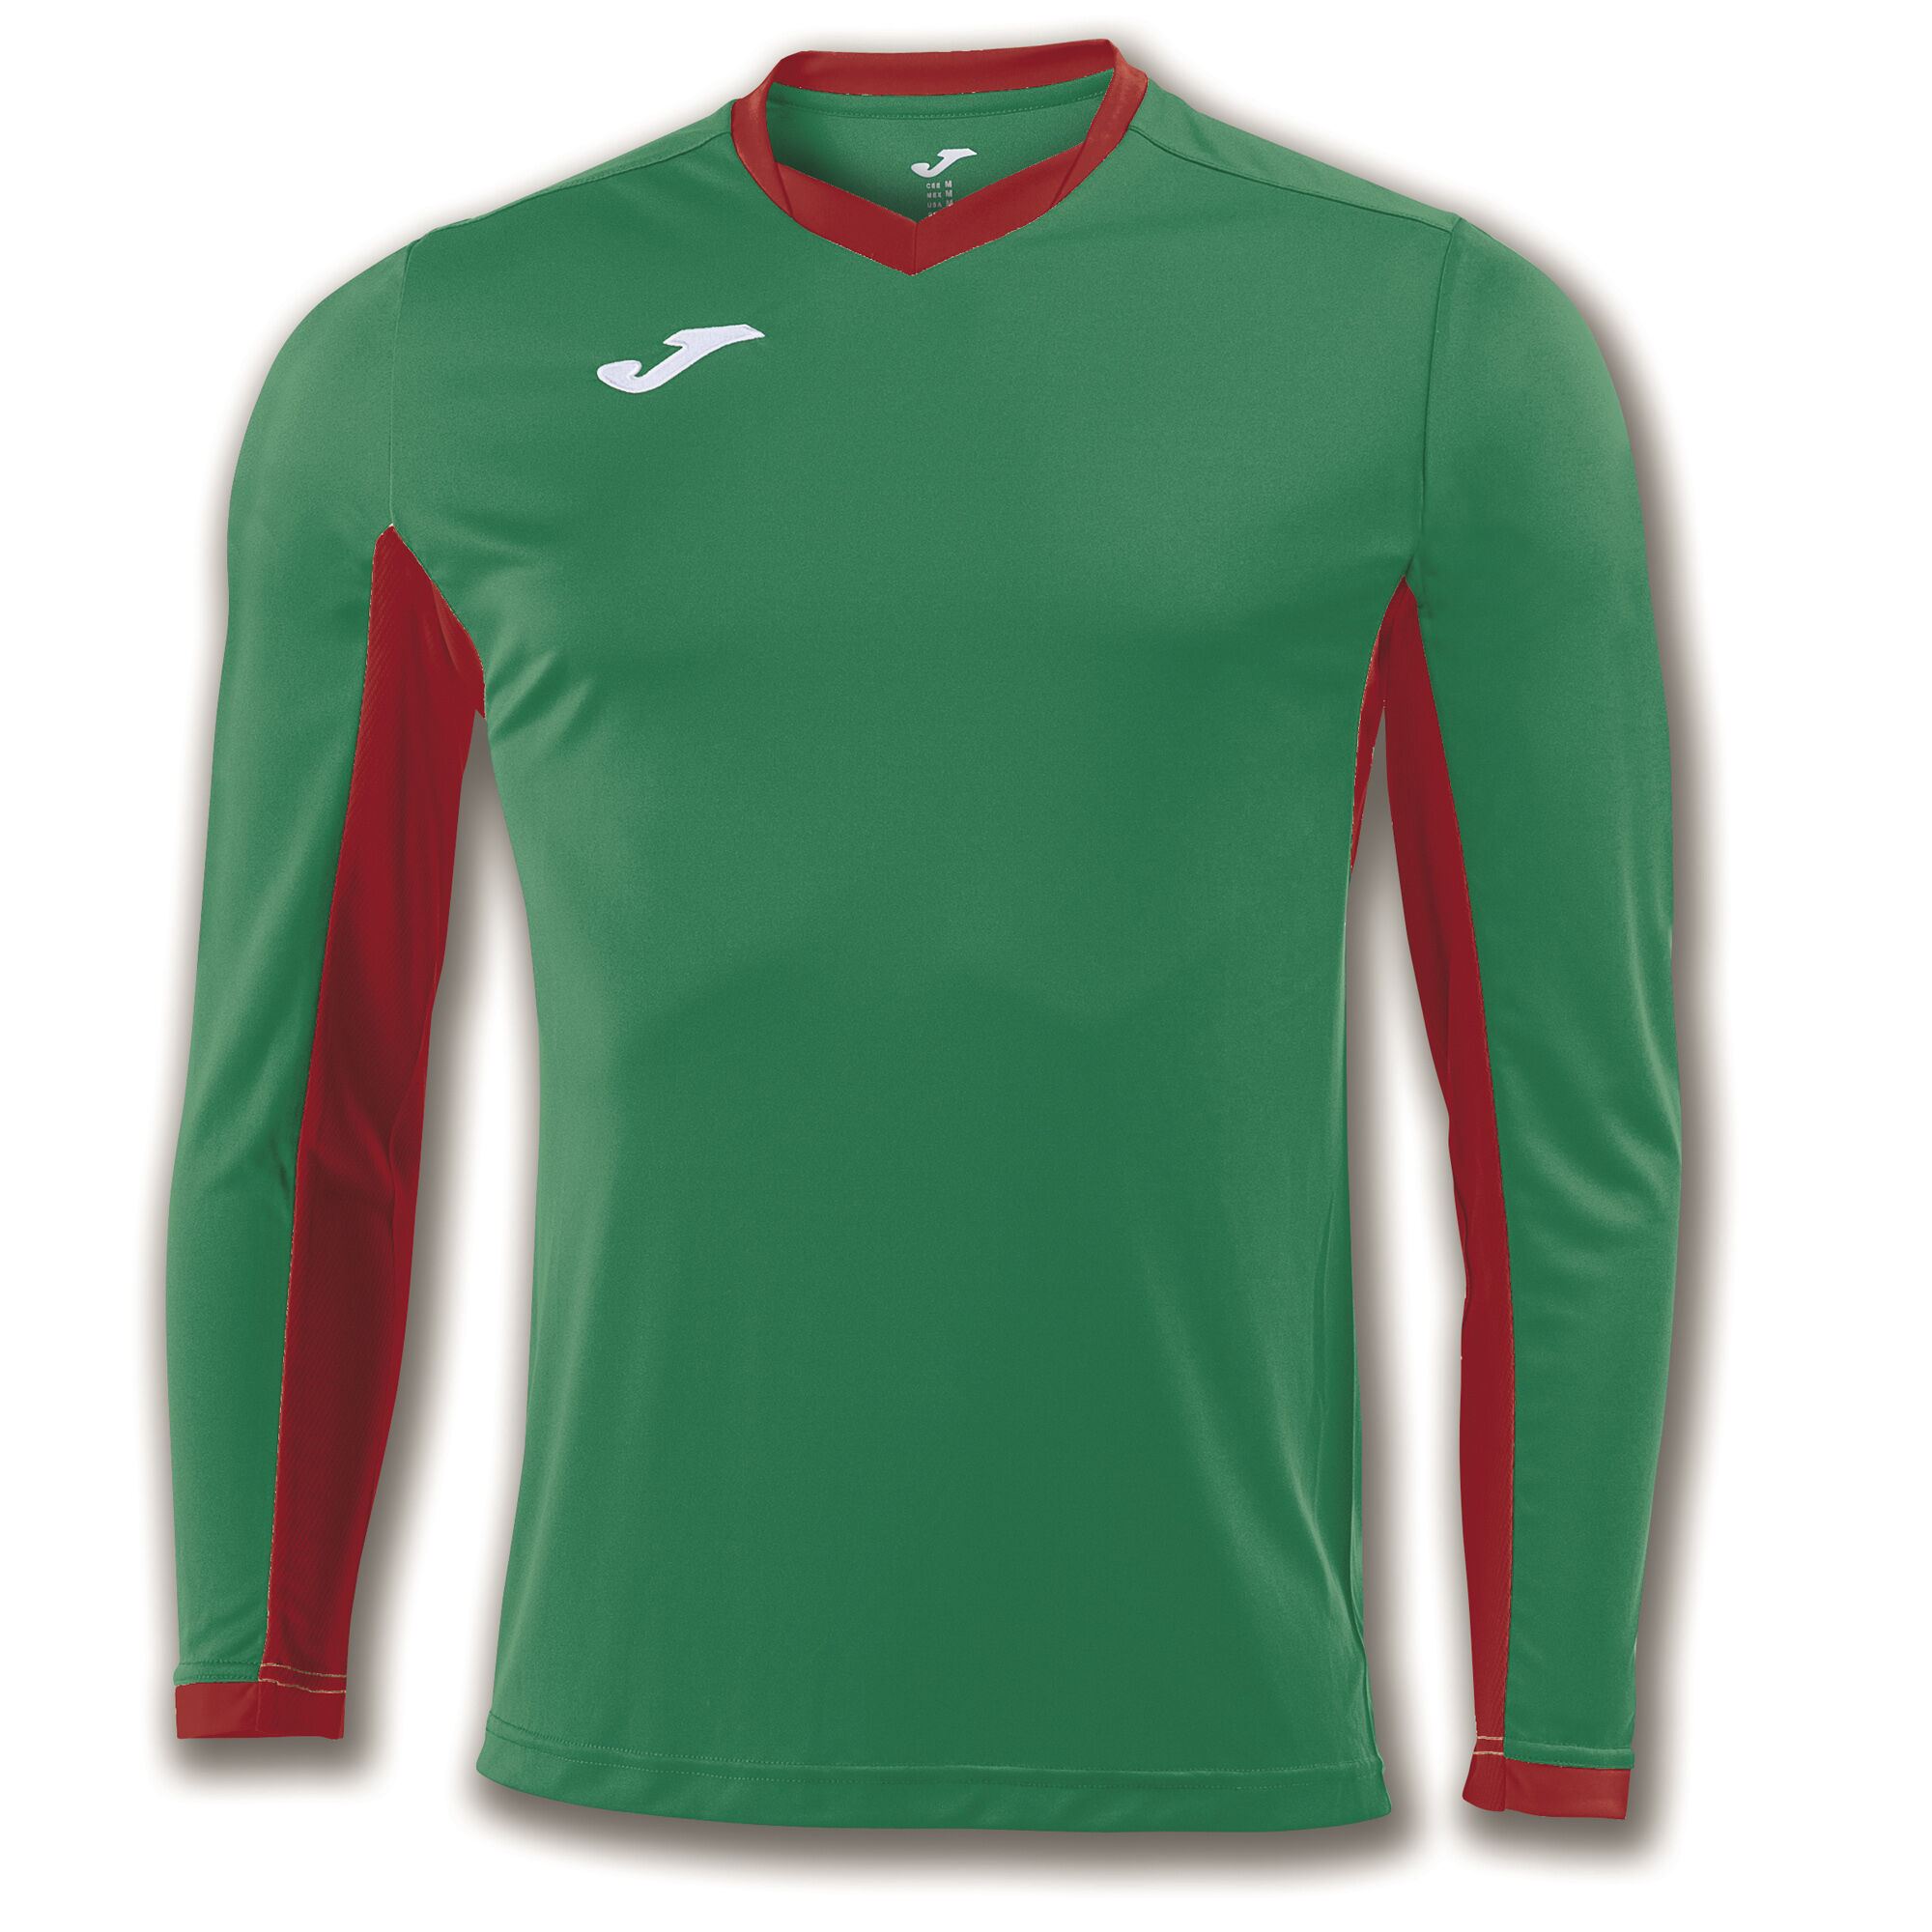 MAILLOT MANCHES LONGUES HOMME CHAMPIONSHIP IV VERT ROUGE